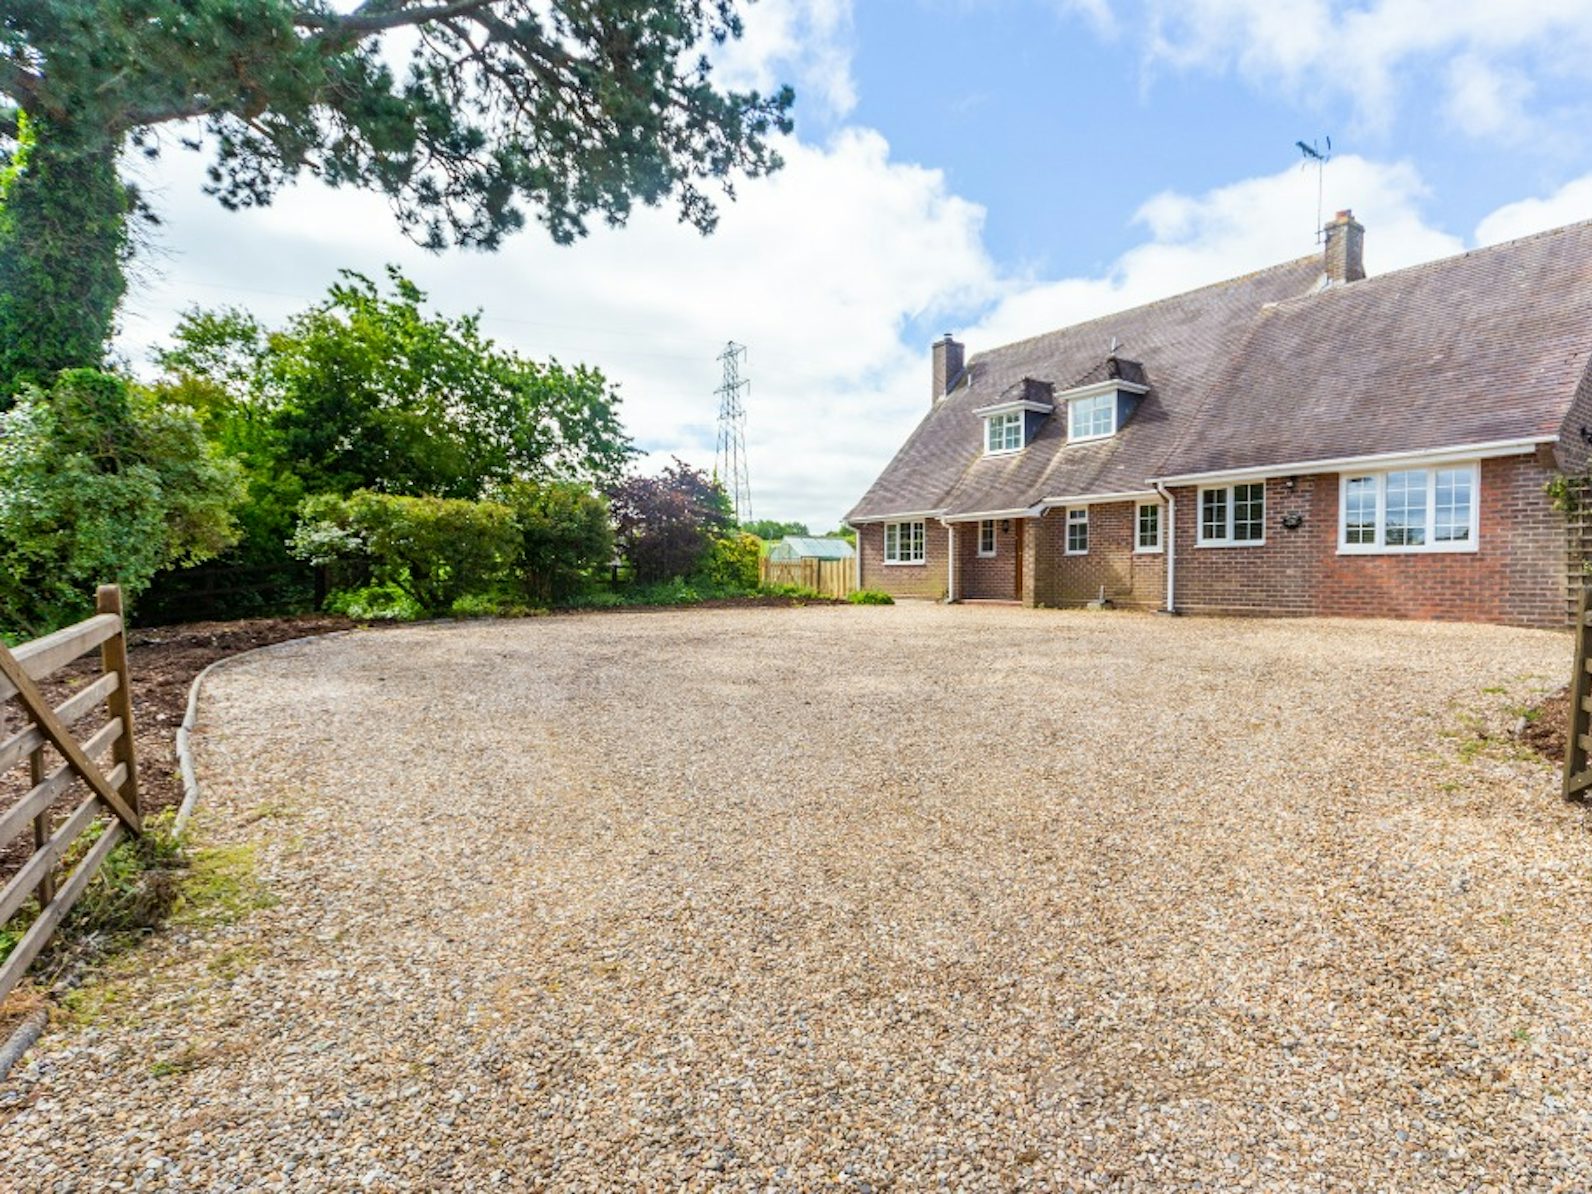 Detached House to rent on Westover Farm Goodworth Clatford, SP11